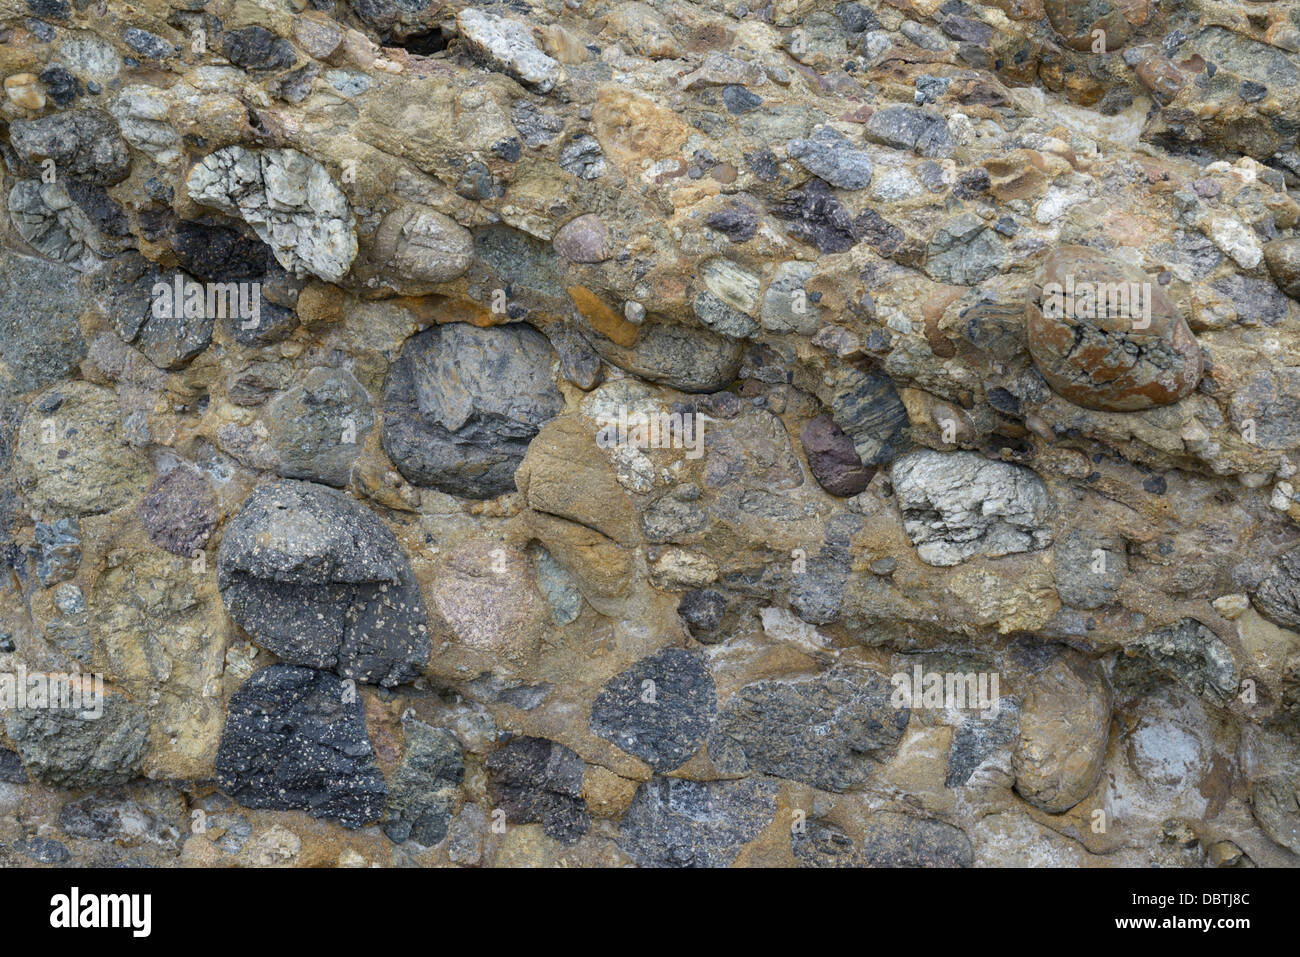 Conglomerate rock with sandstone and pebbles, the Carmelo Formation, Point Lobos State Natural Reserve, CA Stock Photo